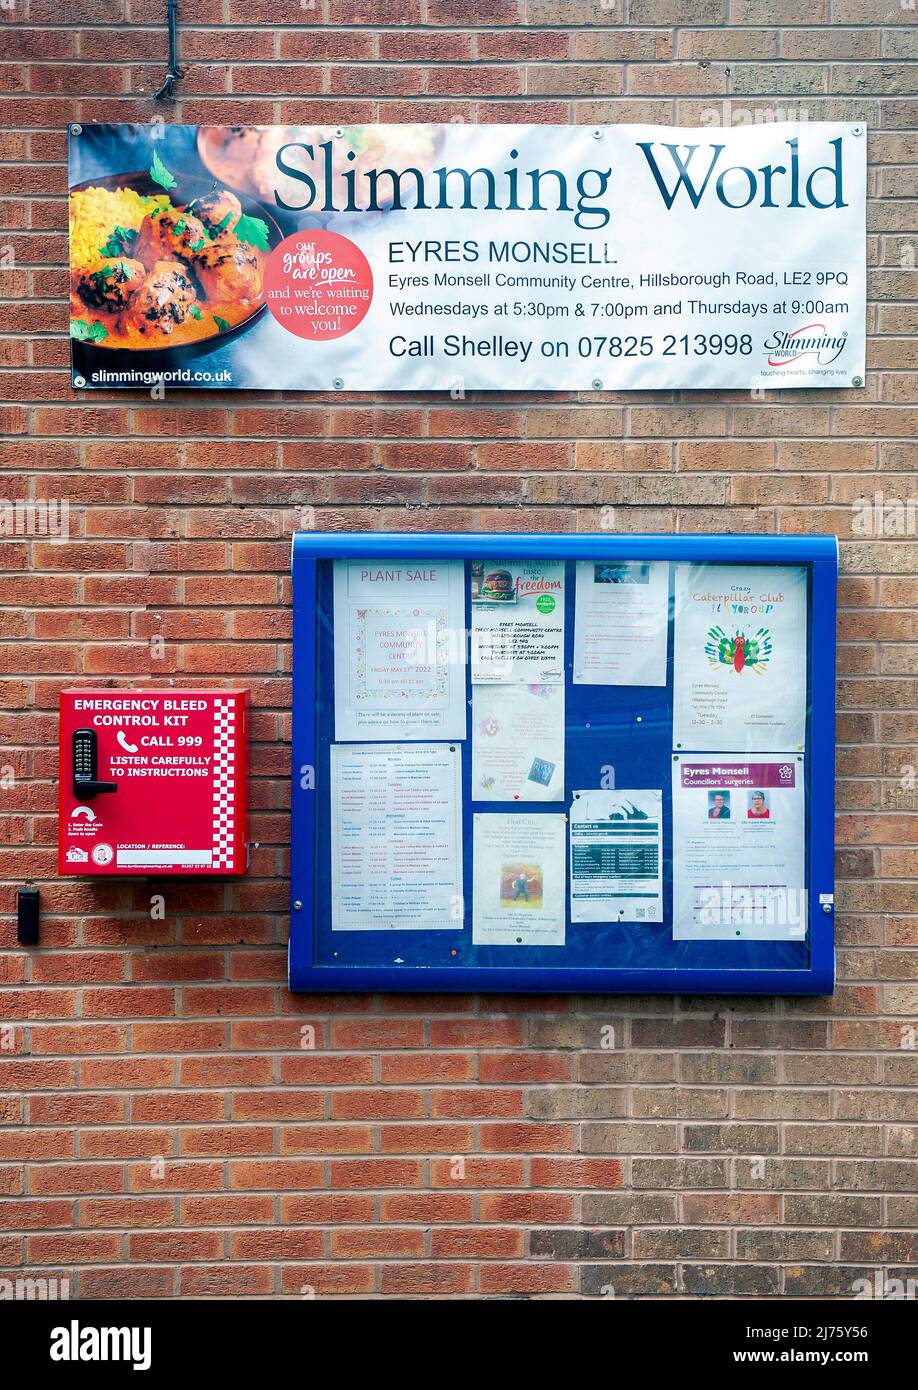 Emergency bleed control kits installed at eight city locations. Eyres Monsell Community Centre. The emergency boxes contain protective gloves, gauze and dressings to stop bleeding and put pressure on wounds. Stock Photo